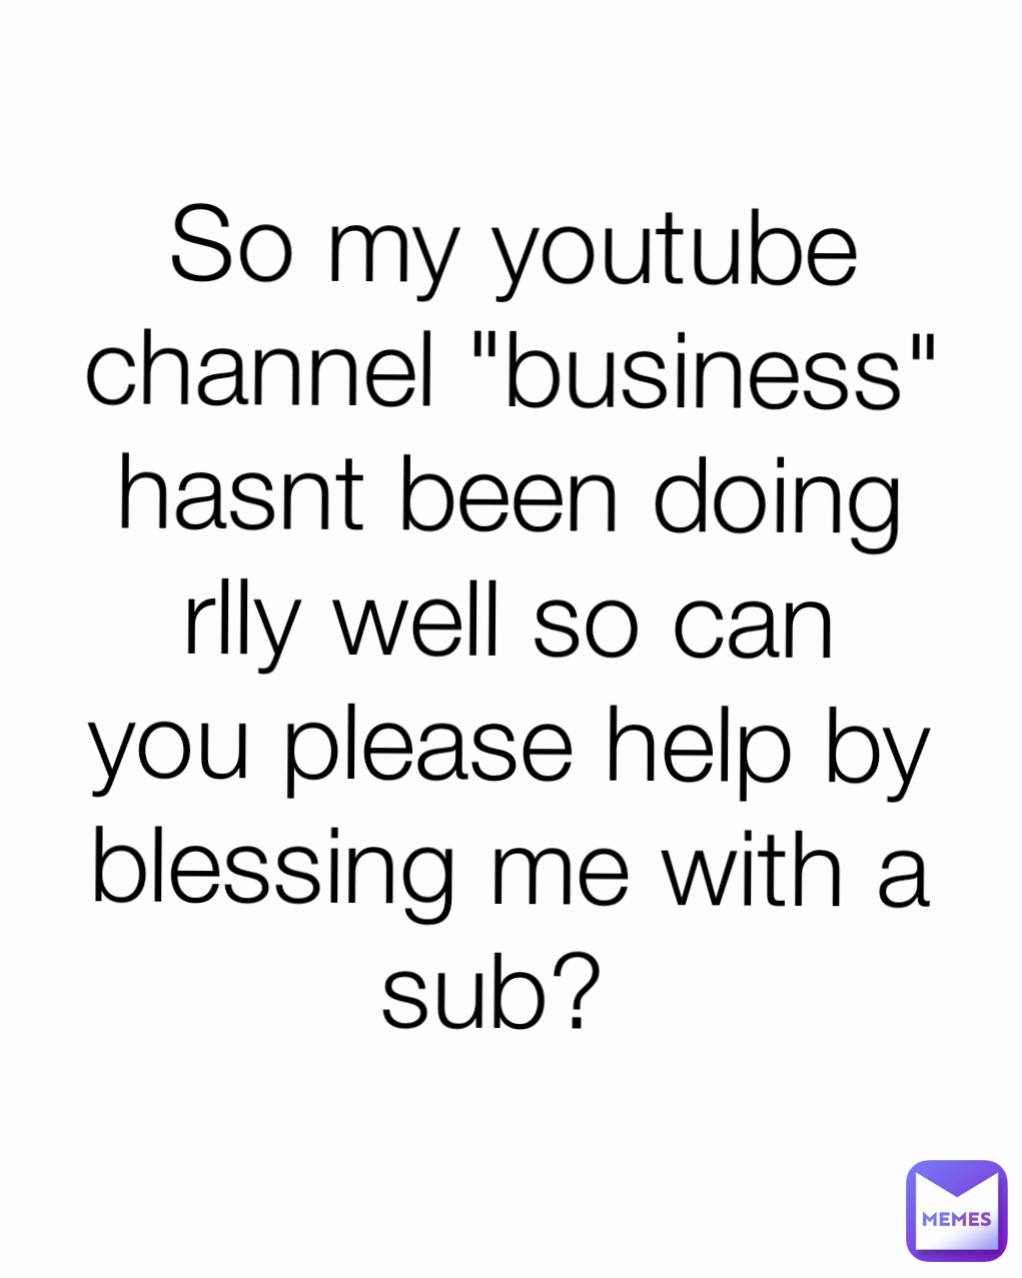 . 
                                    So my youtube channel "business" hasnt been doing rlly well so can you please help by blessing me with a sub? 